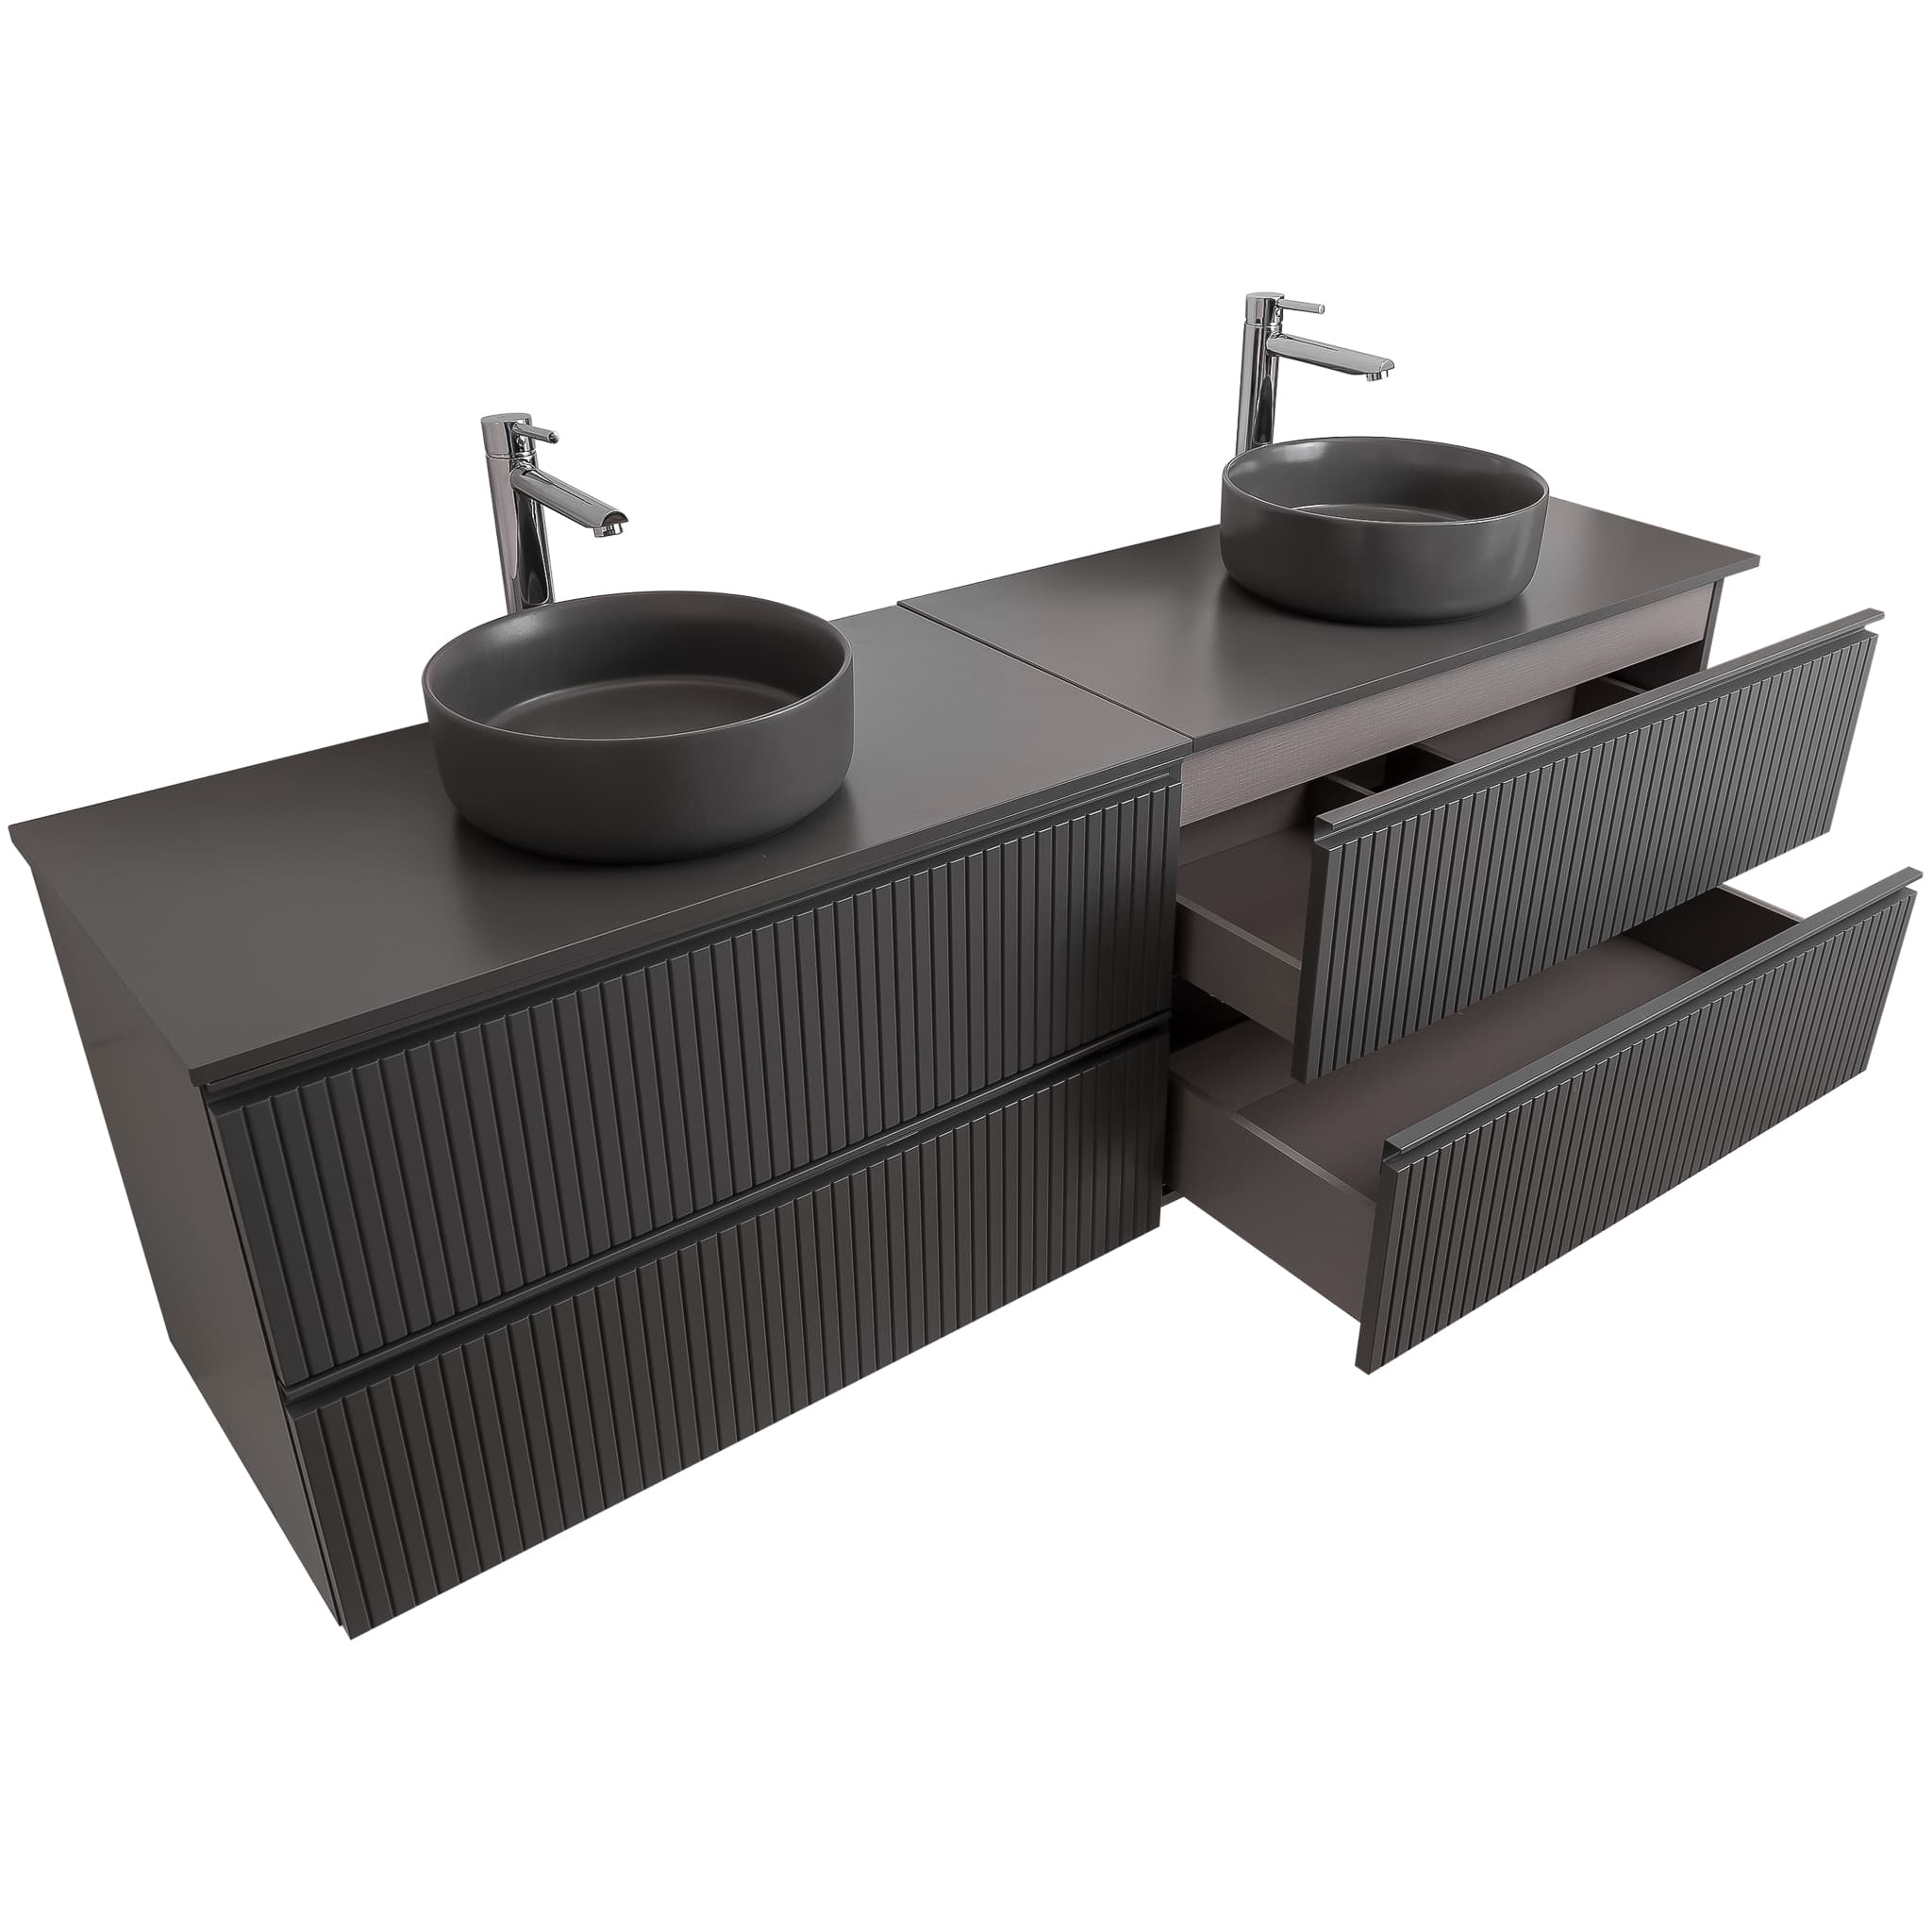 Ares 72 Matte Grey Cabinet, Ares Grey Ceniza Top And Two Ares Grey Ceniza Ceramic Basin, Wall Mounted Modern Vanity Set